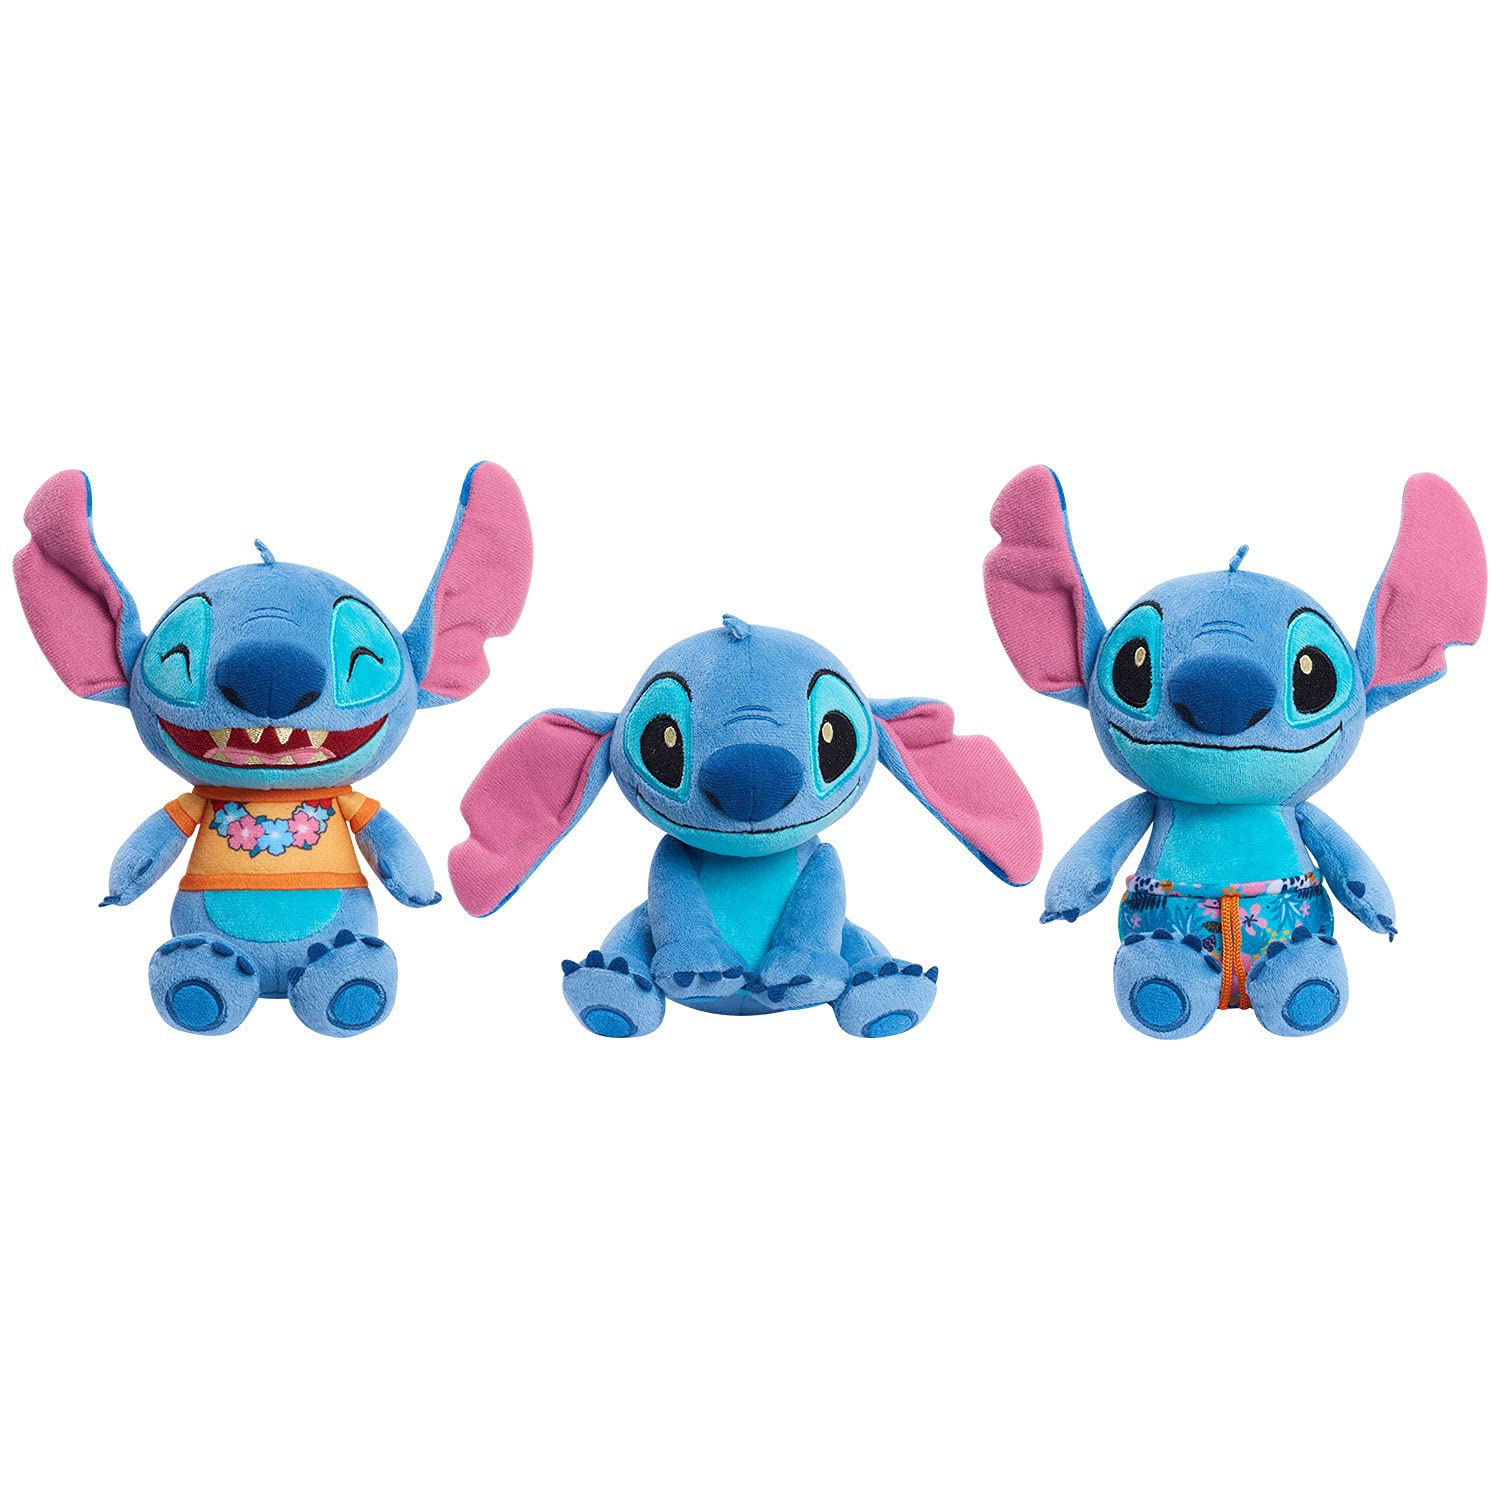 Disney’s Lilo & Stitch 7.5 Inch Beanbag Plushie, Floppy Ears Stitch, Officially Licensed Kids Toys for Ages 2 Up, Gifts and Presents by Just Play